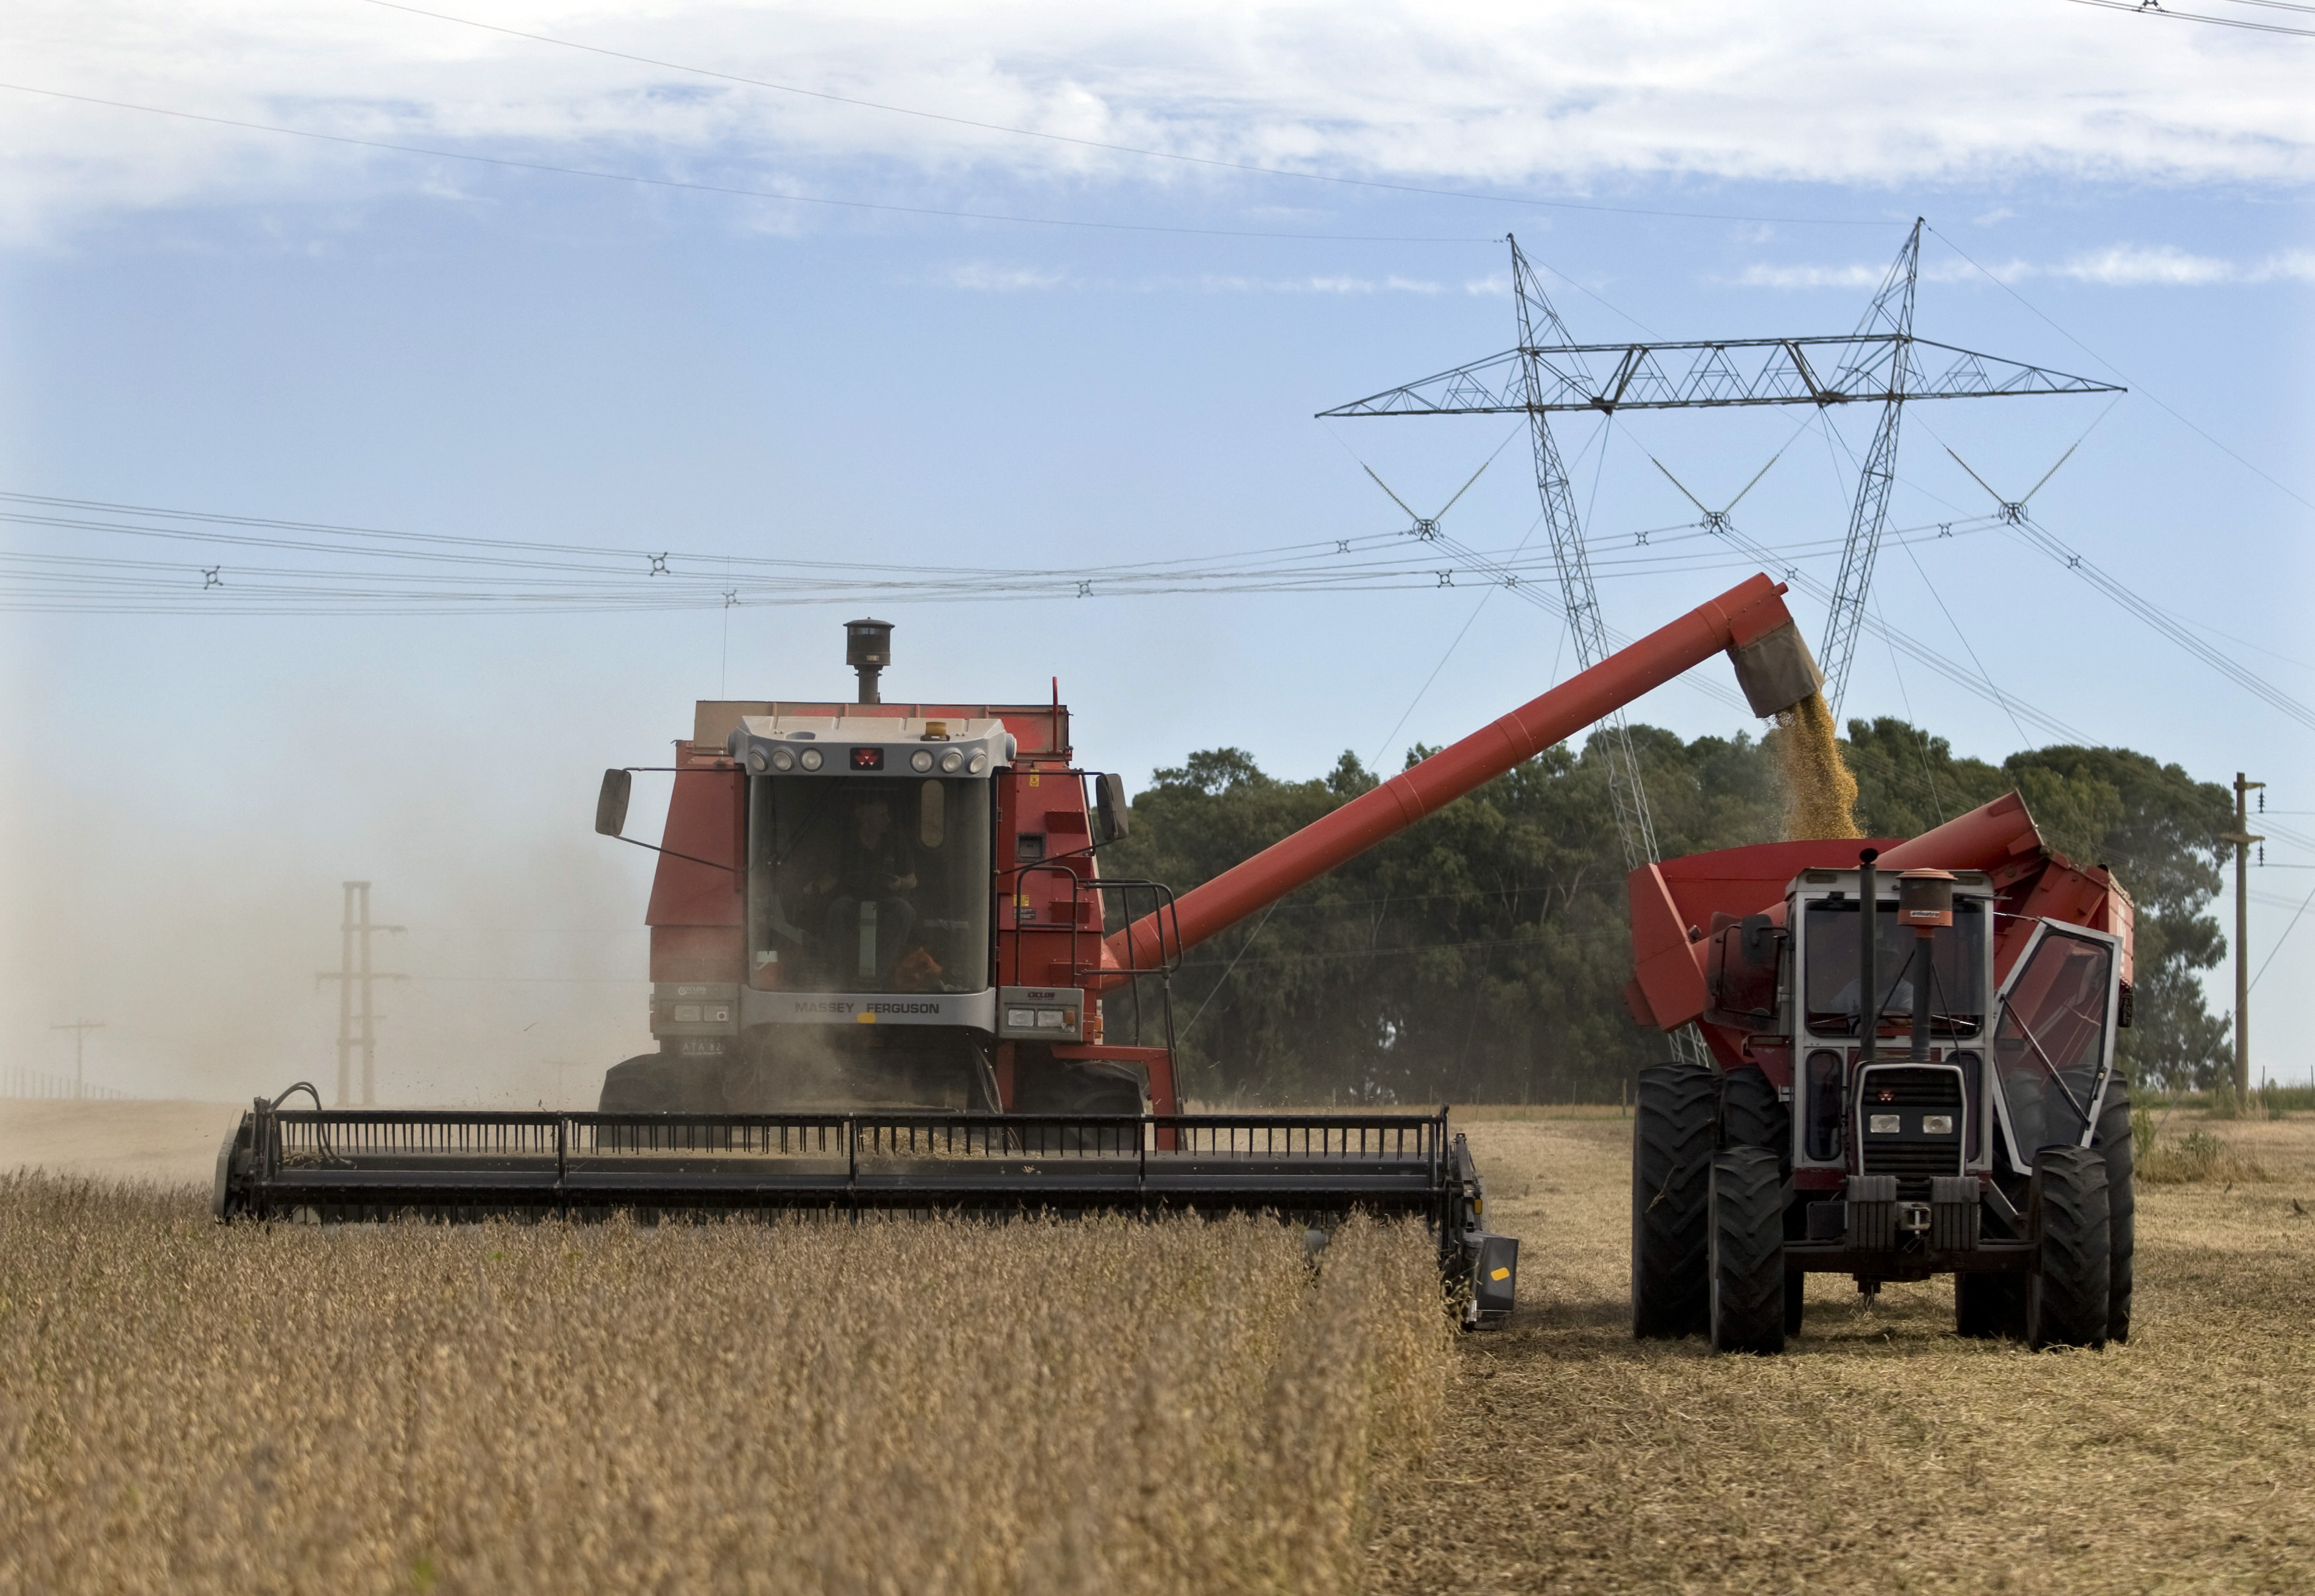 Farmers harvest soybeans in Argentina's town of Estacion Islas